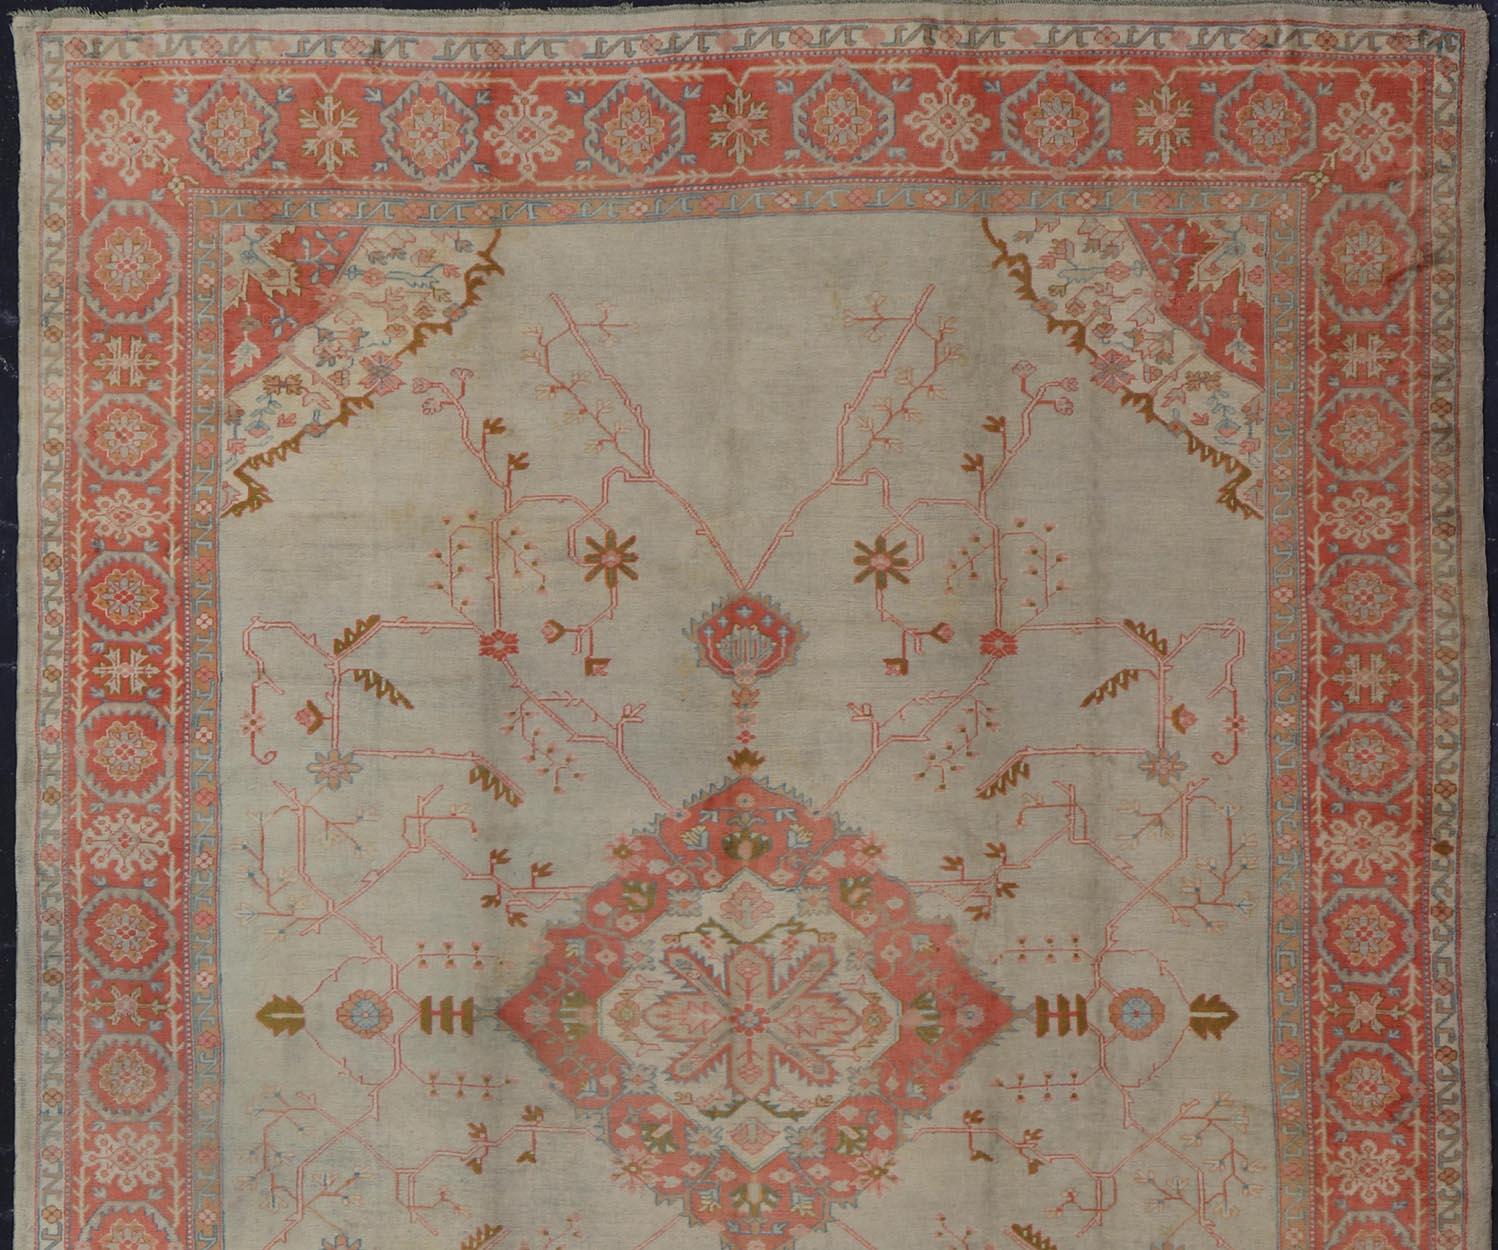 Large antique Turkish Oushak rug in light green background and coral border. Keivan Woven Arts / rug N15-1002, country of origin / type: Turkey / Oushak, circa Early-20th century.
Measures: 13'4 x 18'.
Delicate light sea-foam, taupe and coral imbue